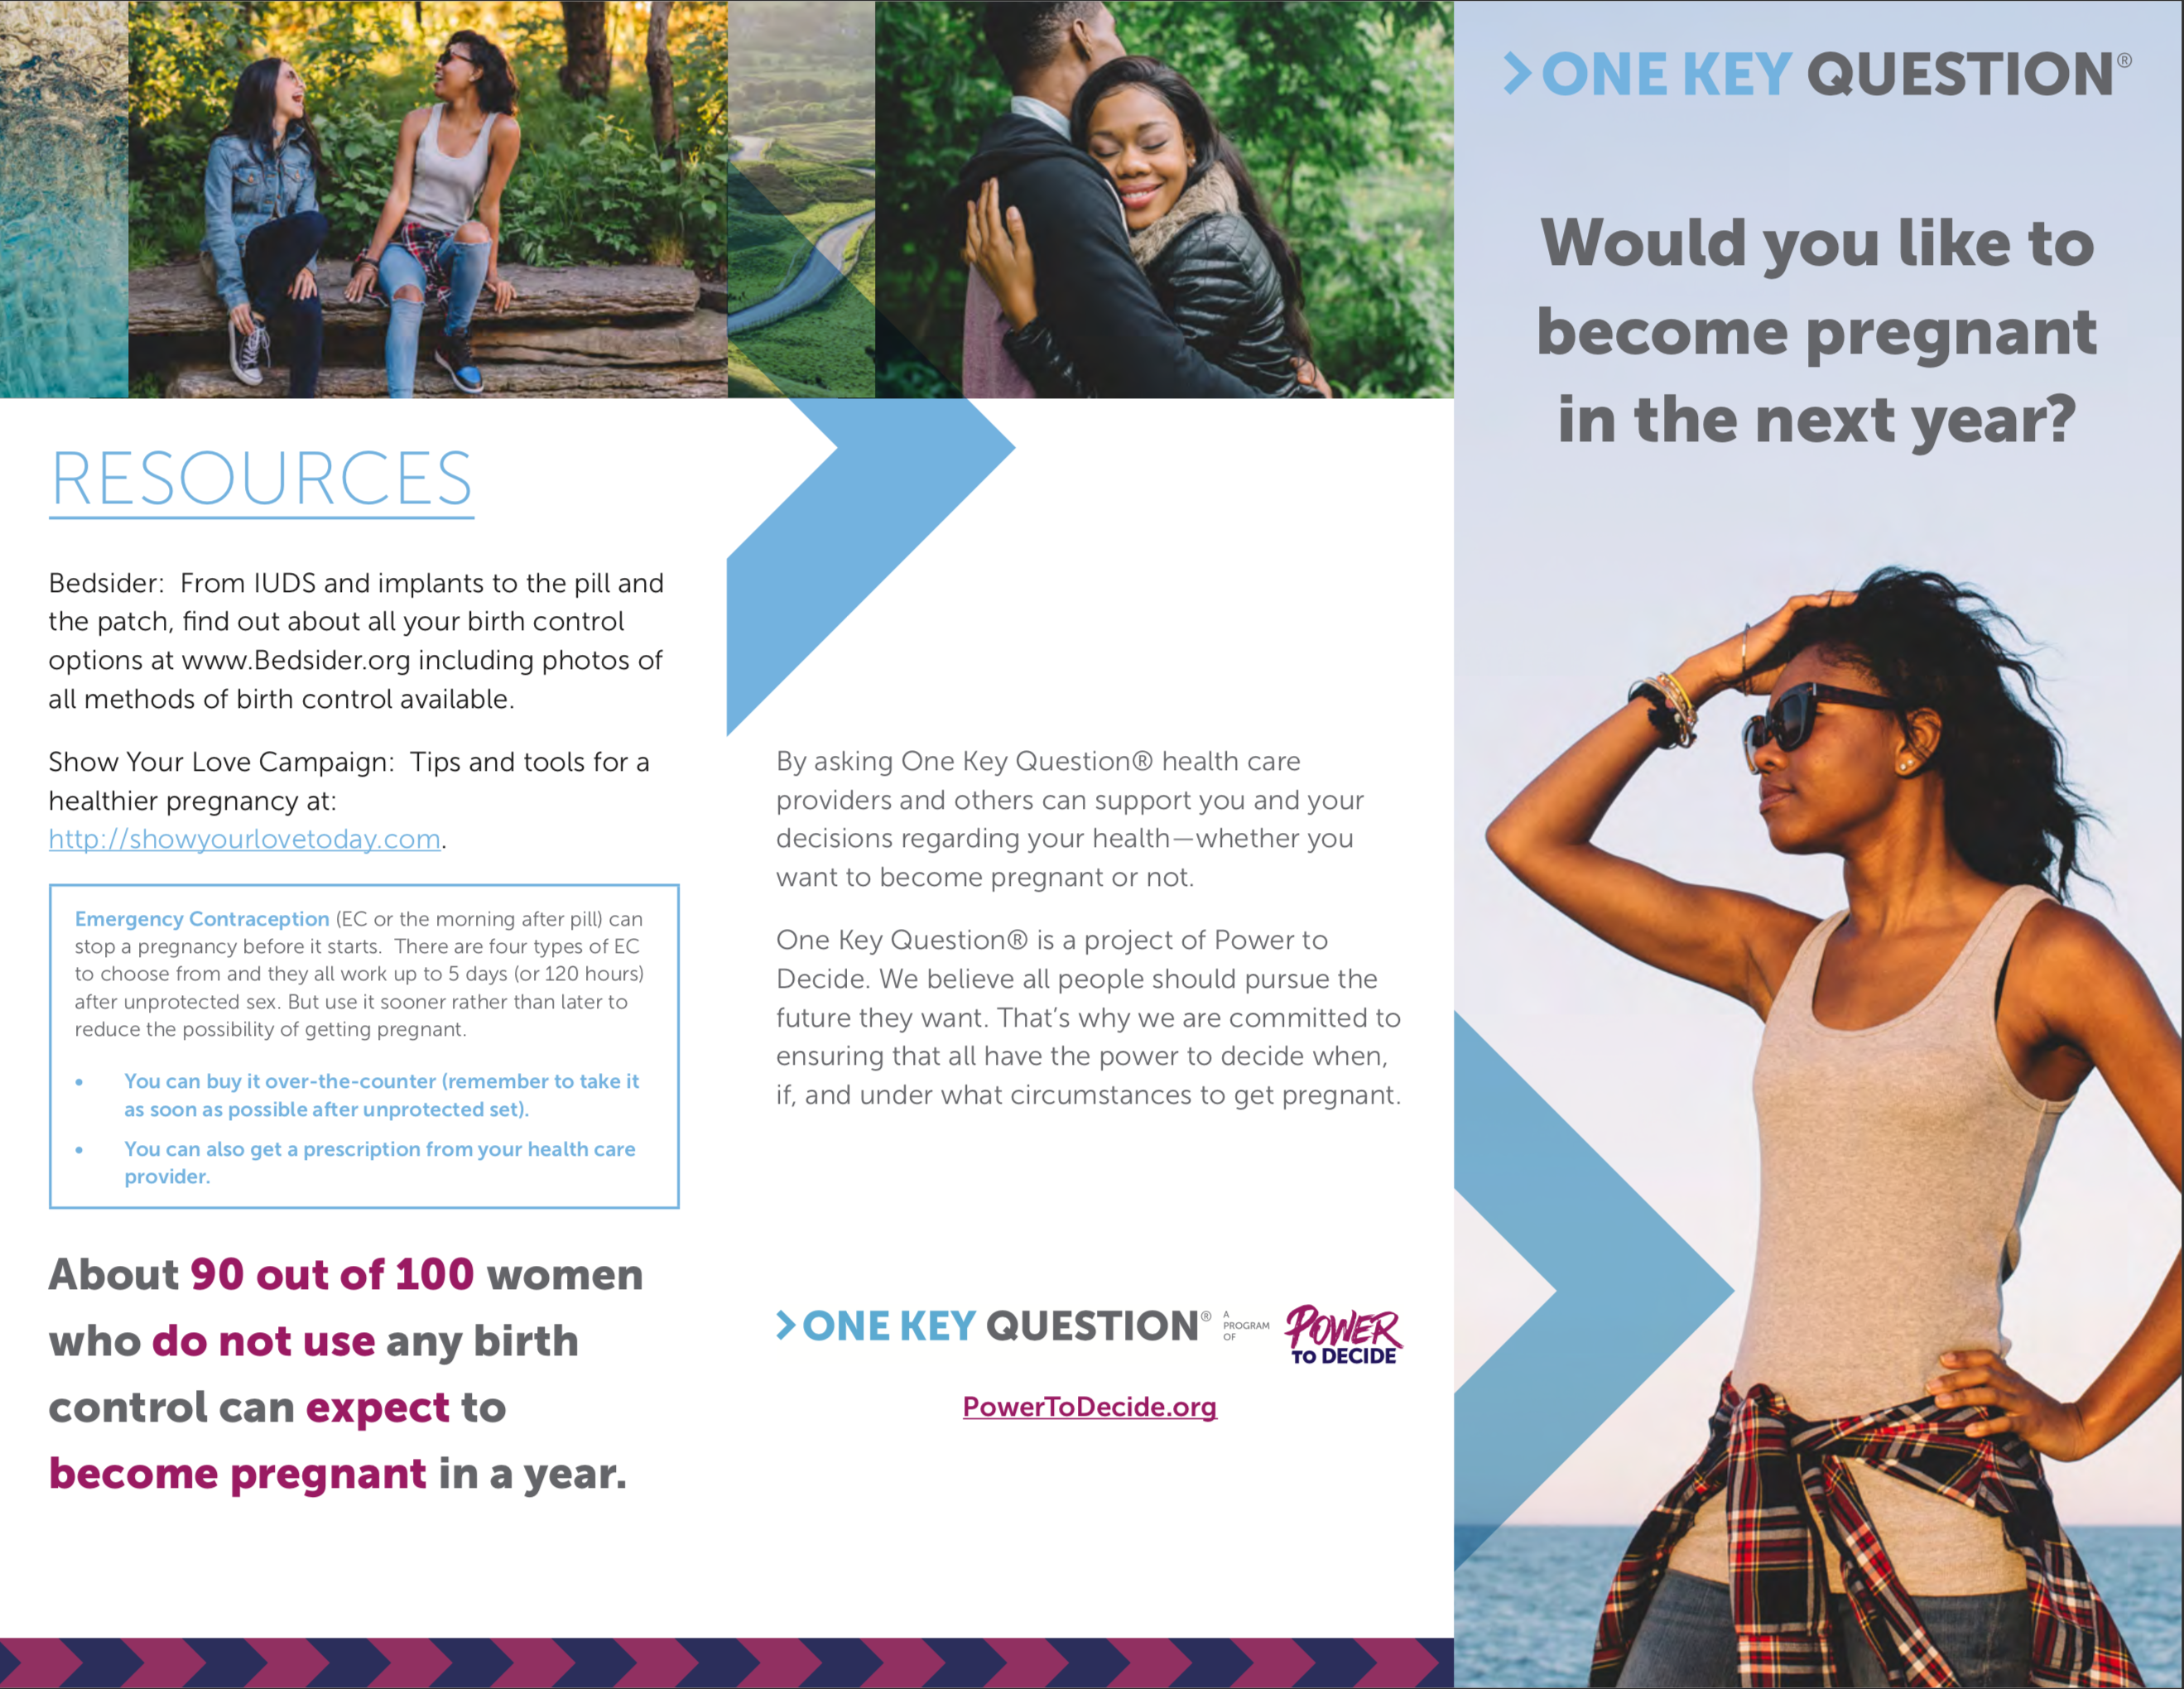 A screenshot of the One Key Question brochure